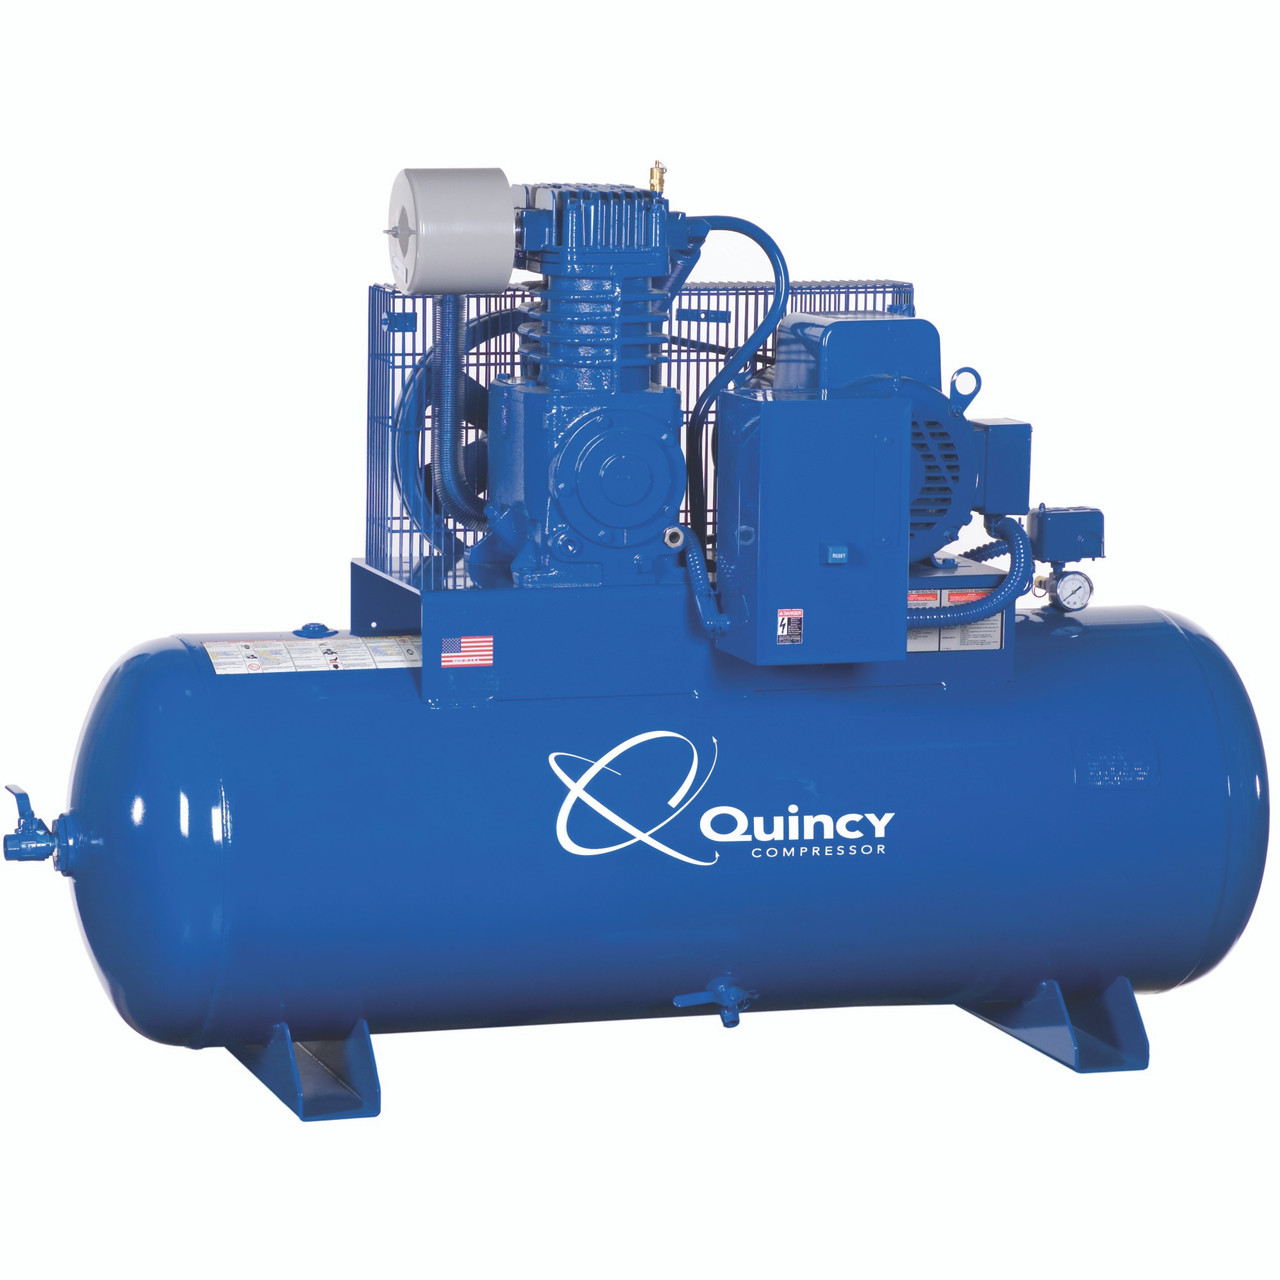 Quincy 3103DS12HCA46 10 HP QP PRO, 460 Volt Three Phase, Two Stage, 120 Gallon Horizontal Air Compressor